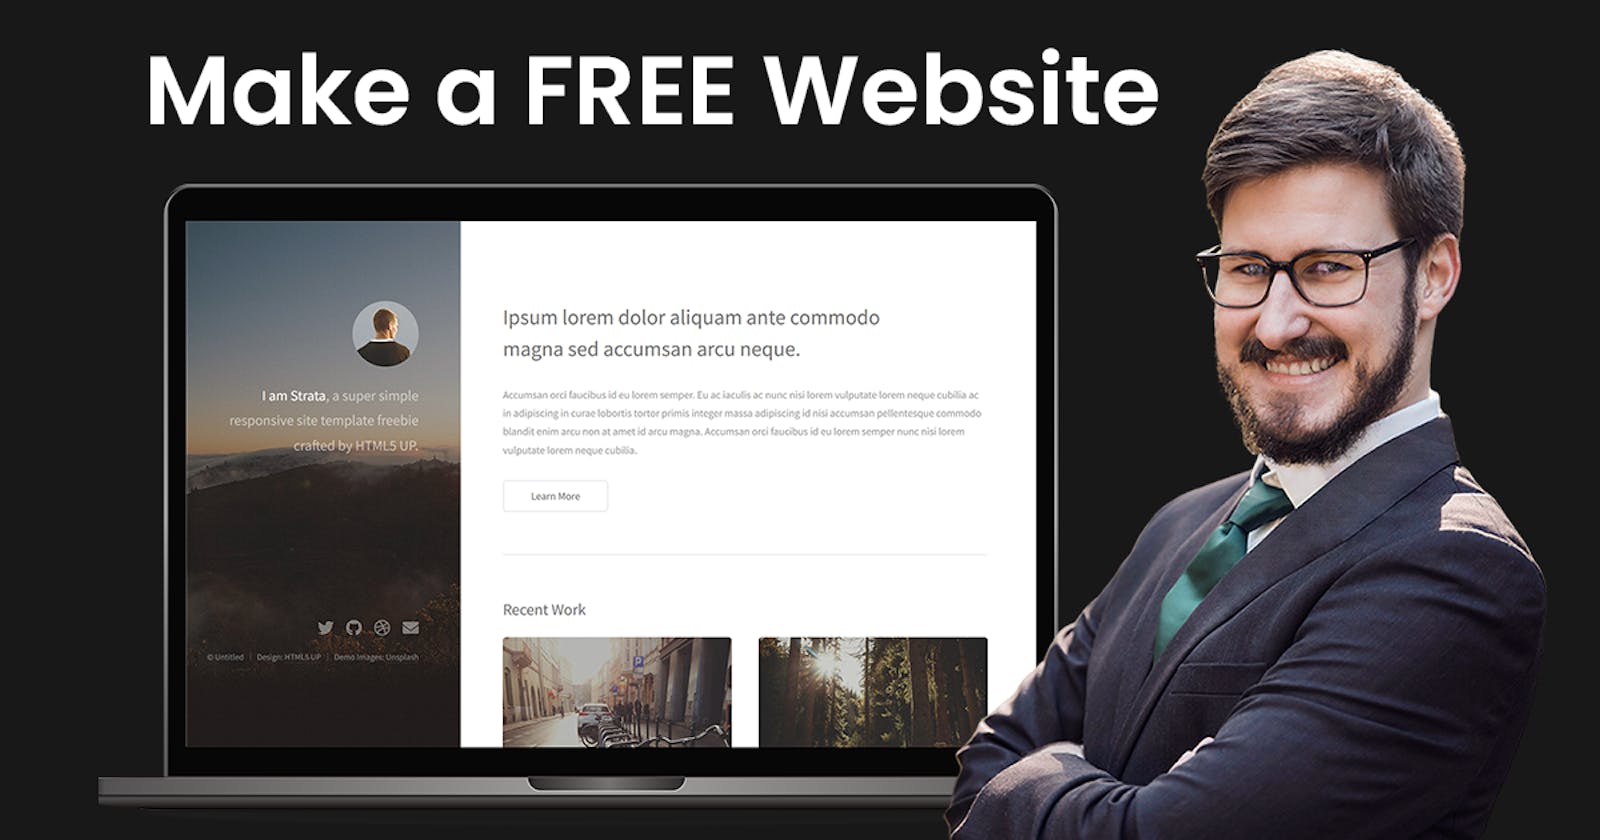 How to create a free, custom website in 15 minutes